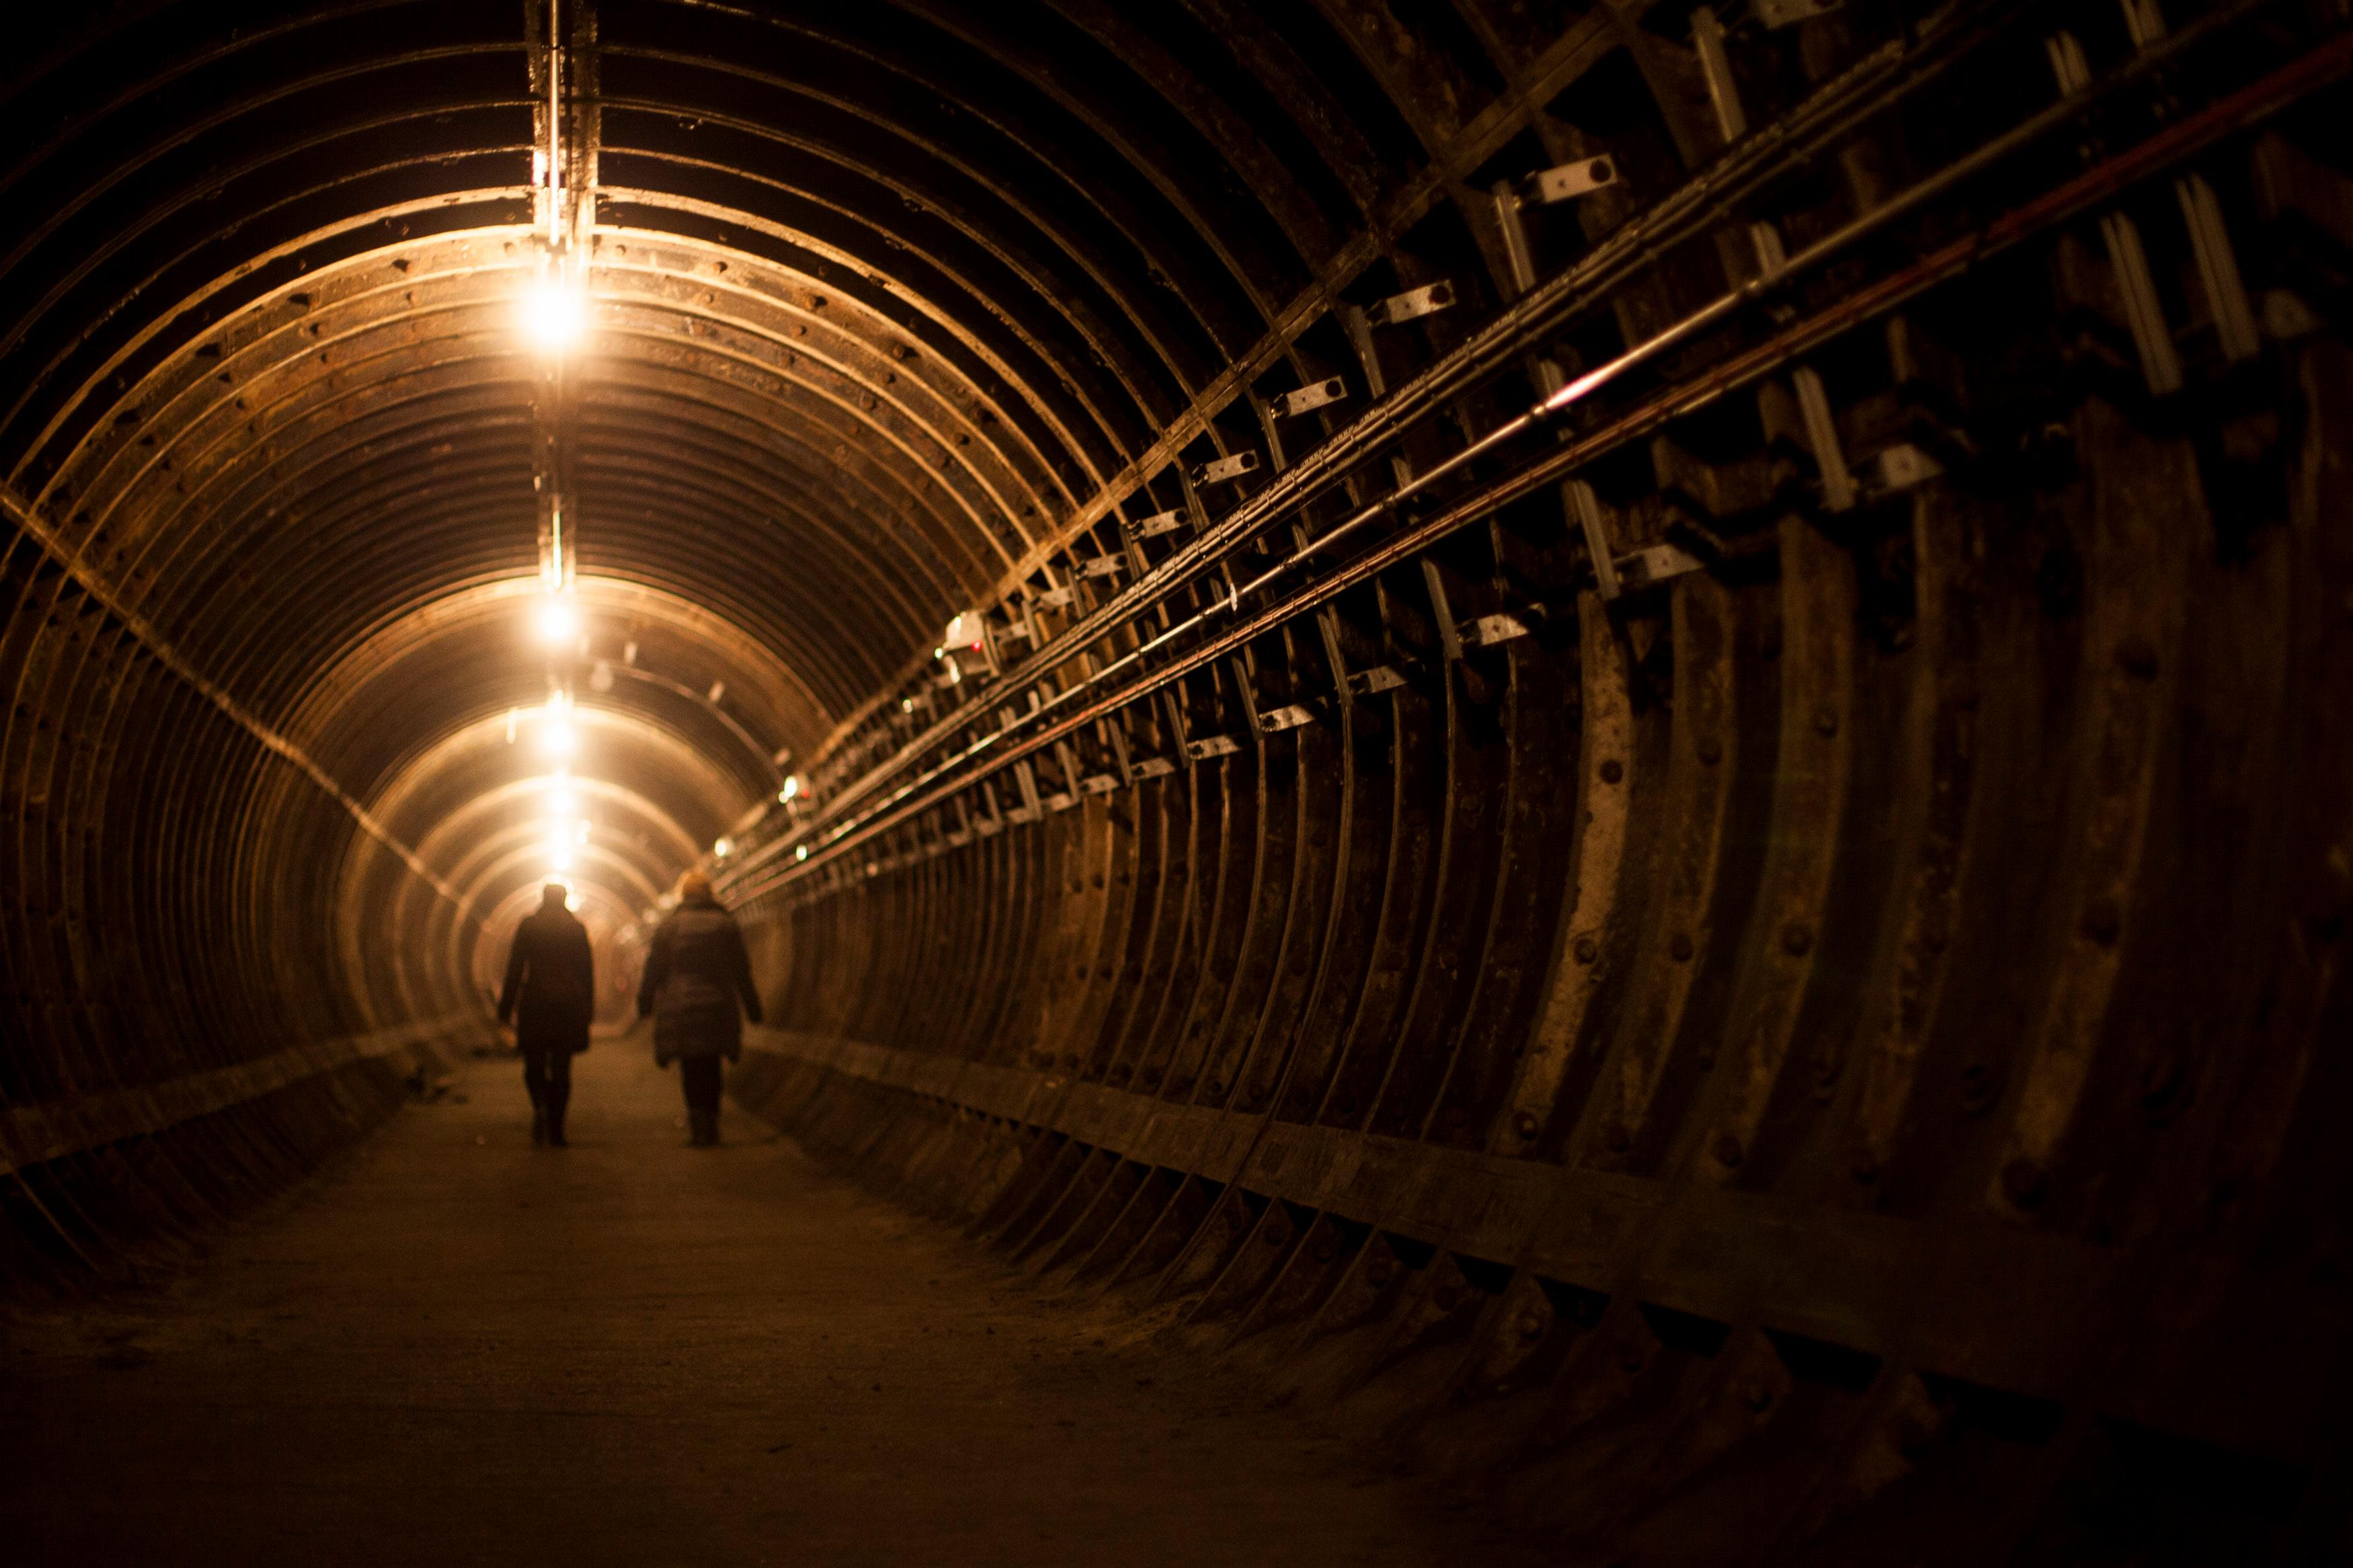 Charing Cross Tunnels as part of the Hidden London tours